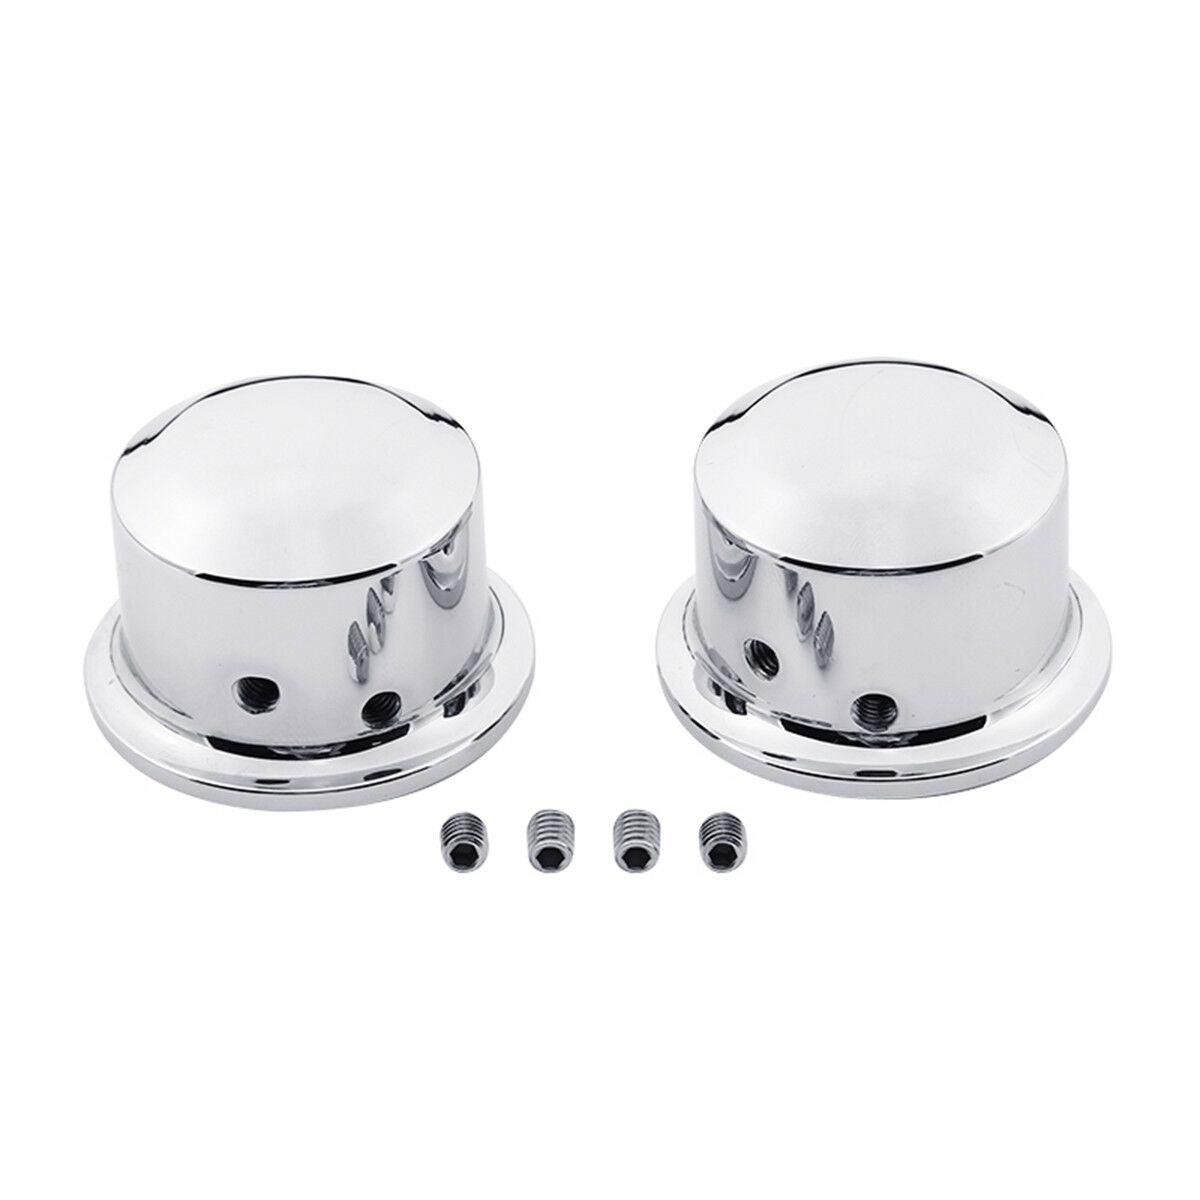 CNC Chrome Front Axle Nut Covers Bolt Set Fit For Harley Dyna Street Bob 08-17 - Moto Life Products